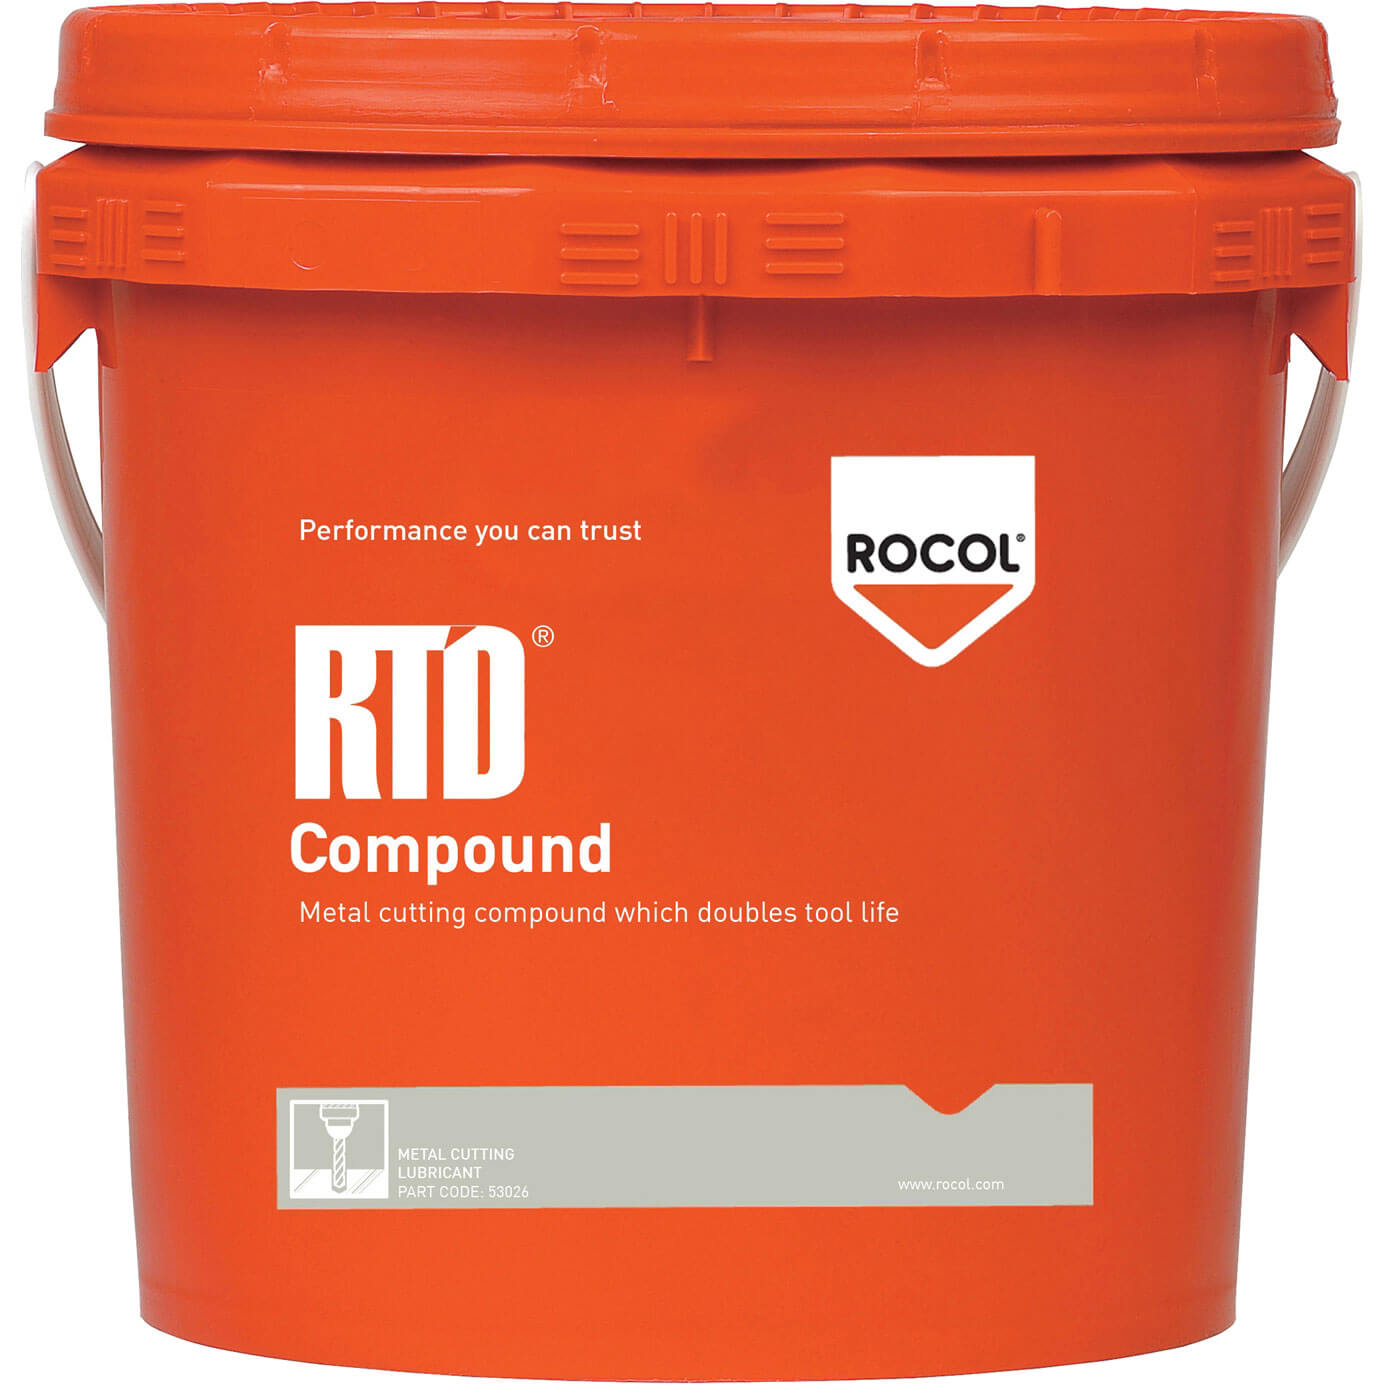 Image of Rocol RTD Cutting Compound 5kg